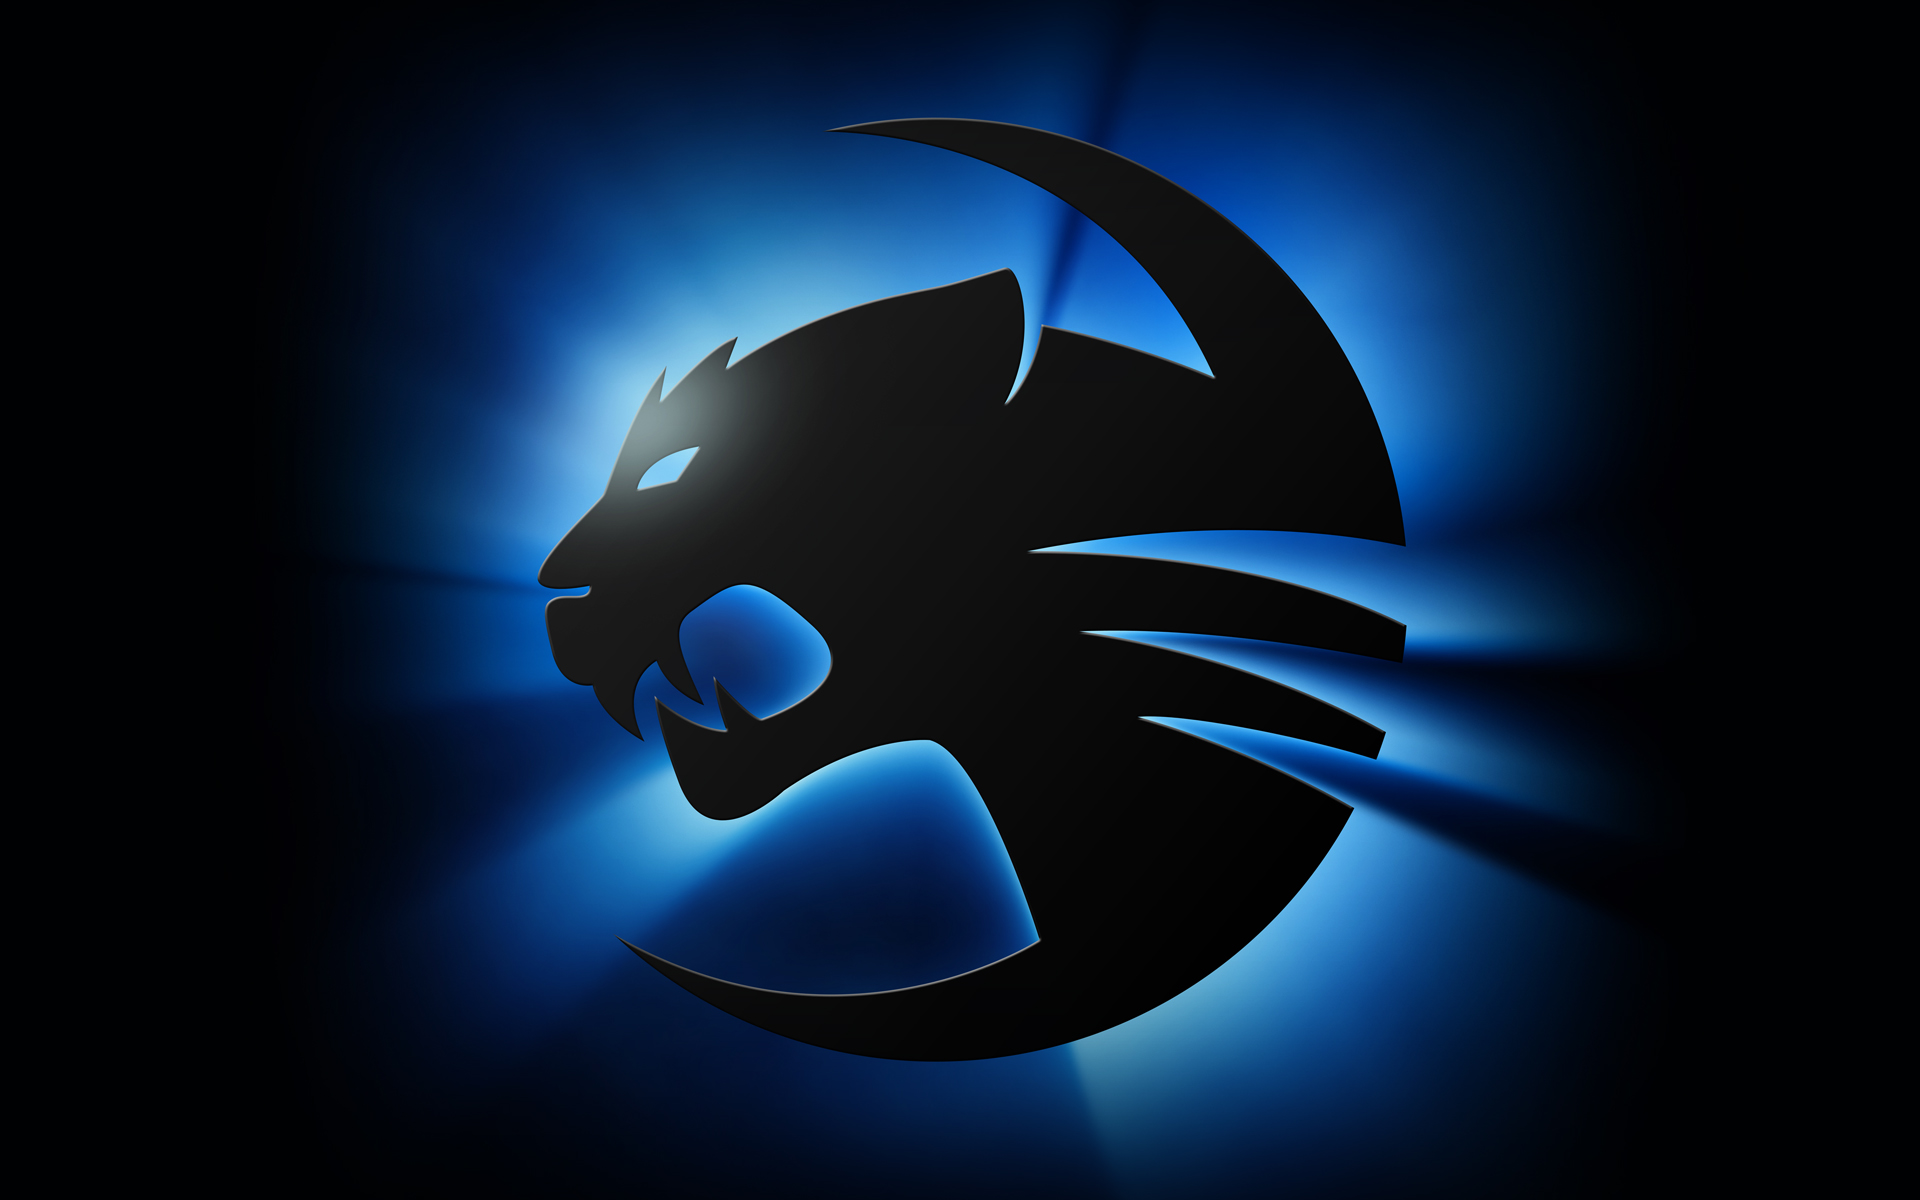 ROCCAT enters the fray at DreamHack Winter 2013